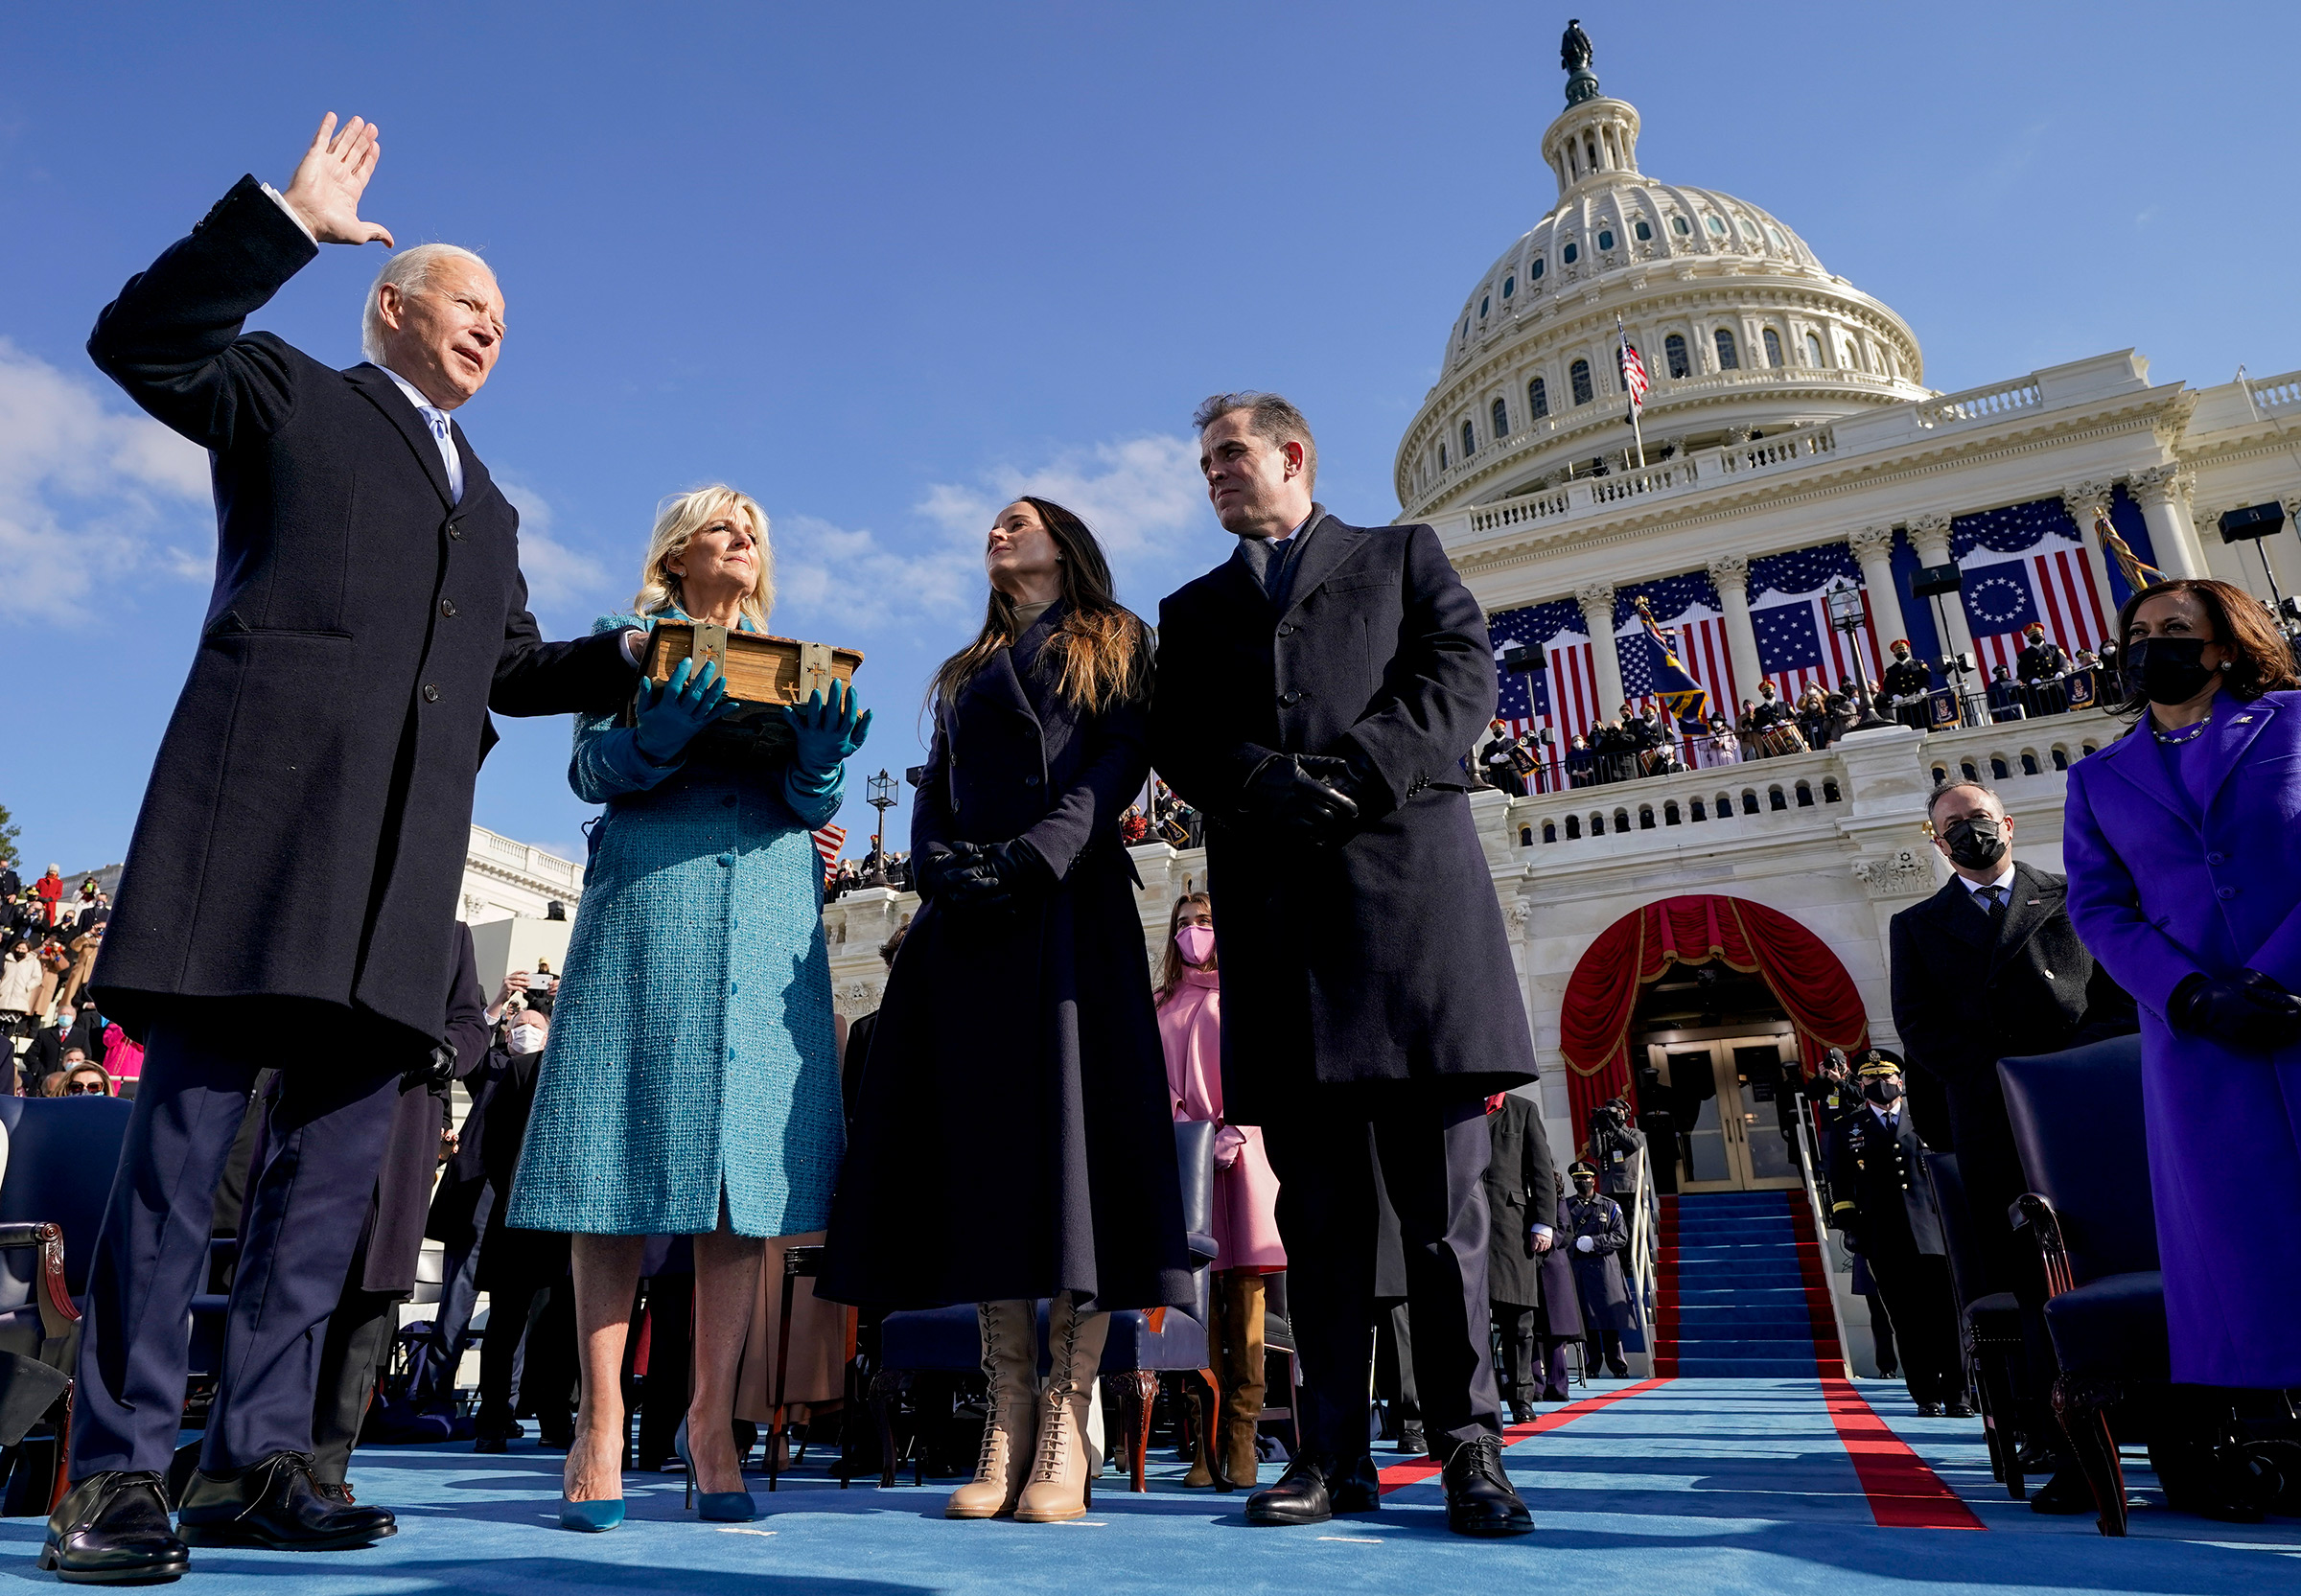 Joe Biden is sworn in as the 46th president of the United States by Chief Justice John Roberts as Jill Biden holds the Bible. (Andrew Harnik—Pool/AP)